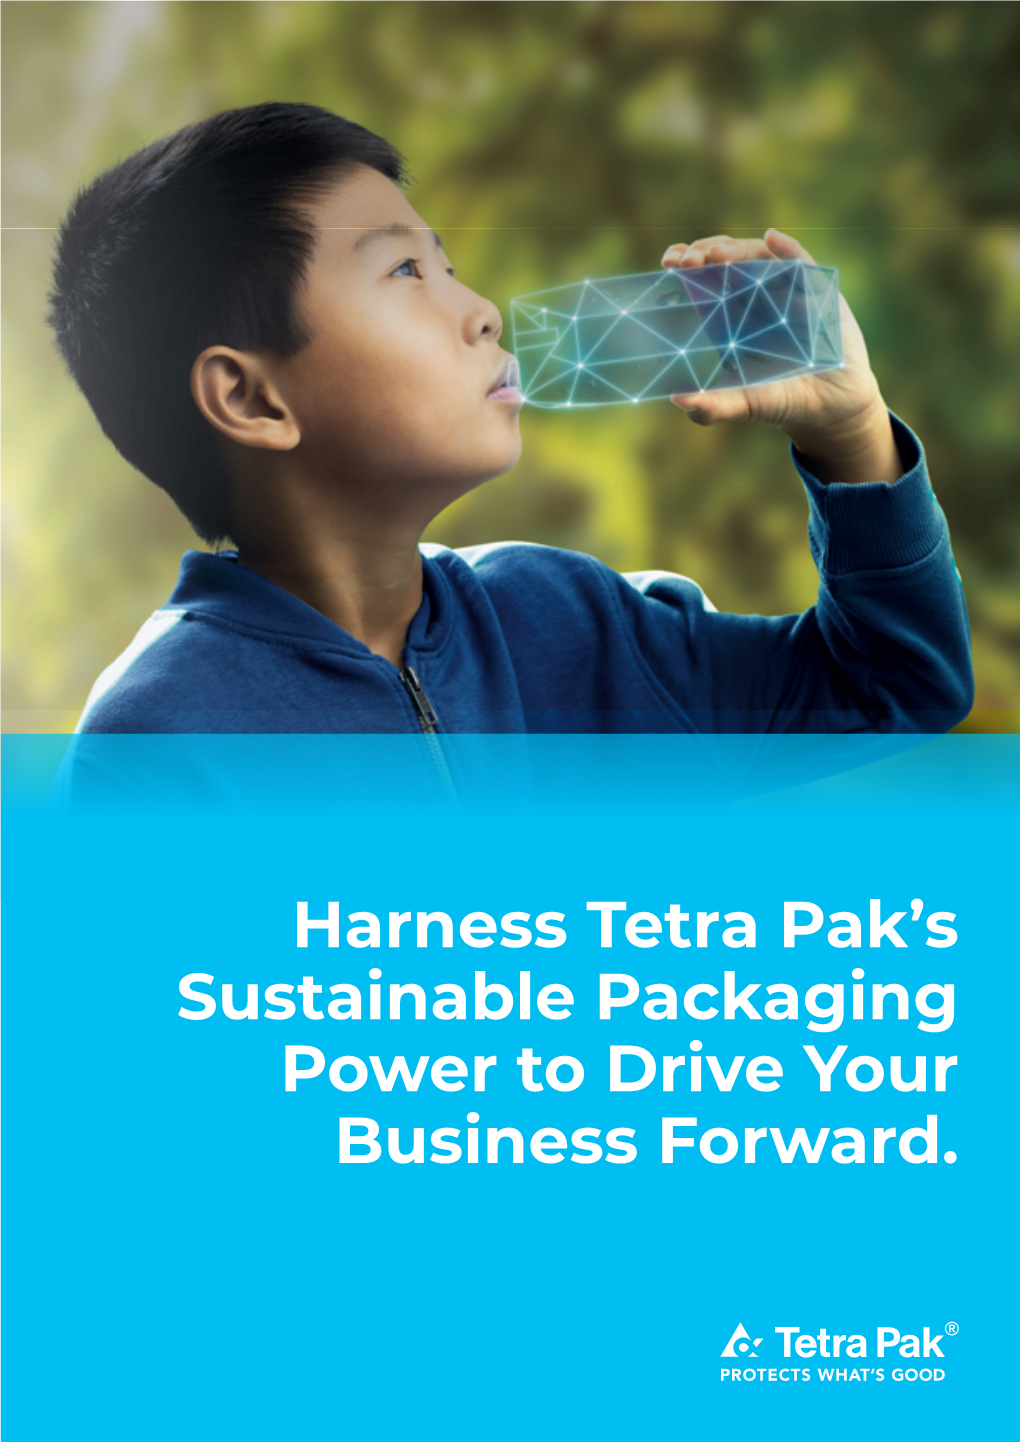 Harness Tetra Pak's Sustainable Packaging